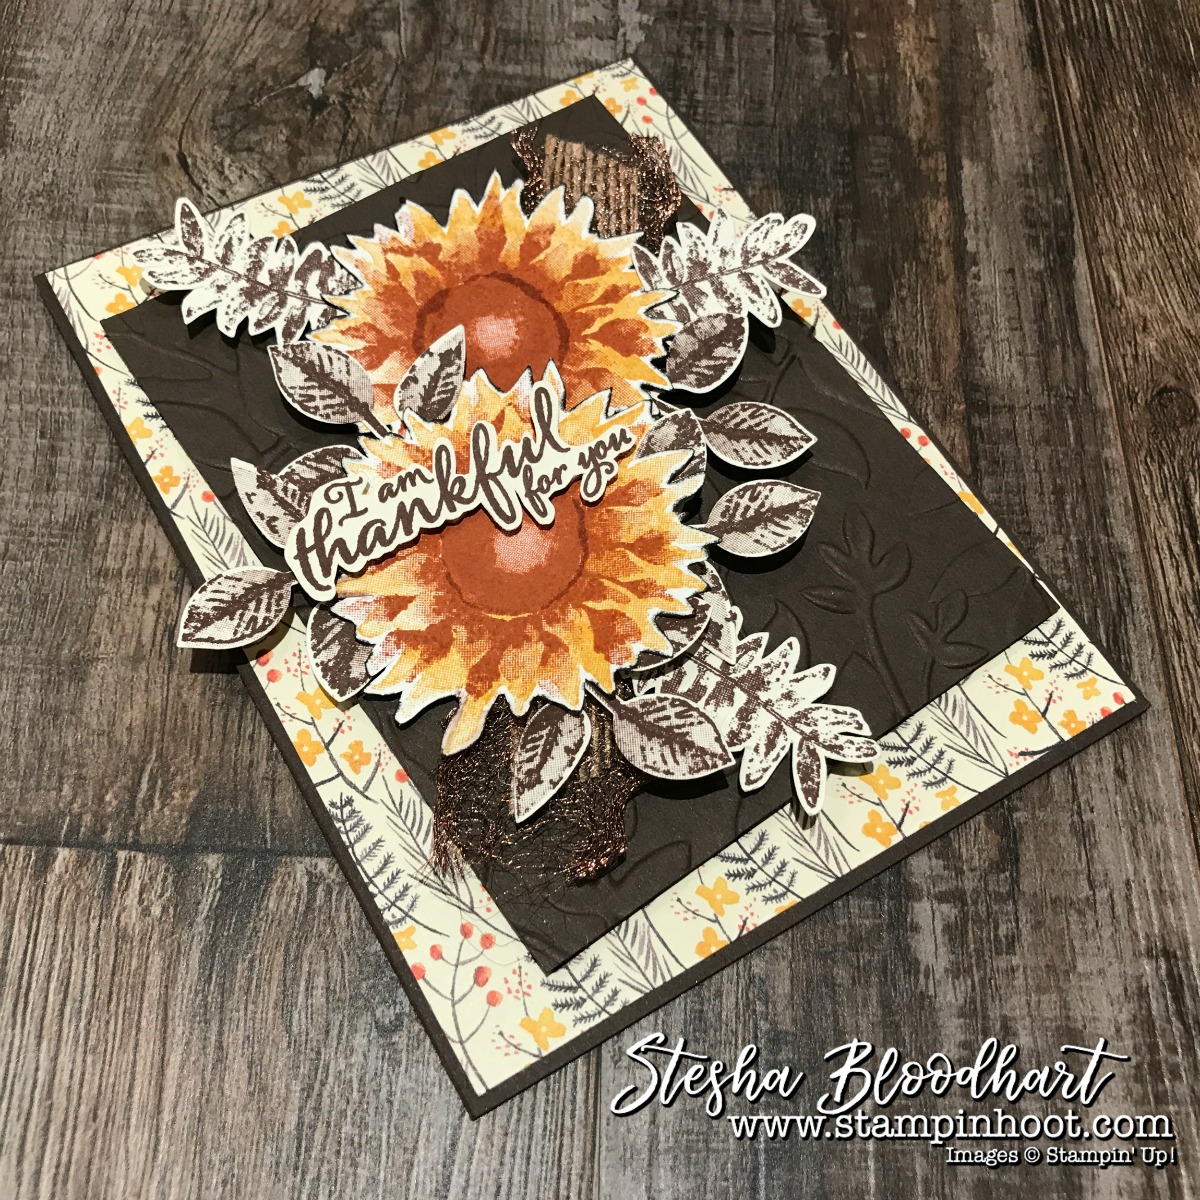 Painted Harvest Bundle by Stampin' Up! Sneak Peek of Thank You Cards designs by Stesha Bloodhart, Stampin' Hoot! #paintedharvest #thankyoucards #handmadecards #cardmaking #stampinup #falldecor #sunflowers #stampinhoot #demonstrator